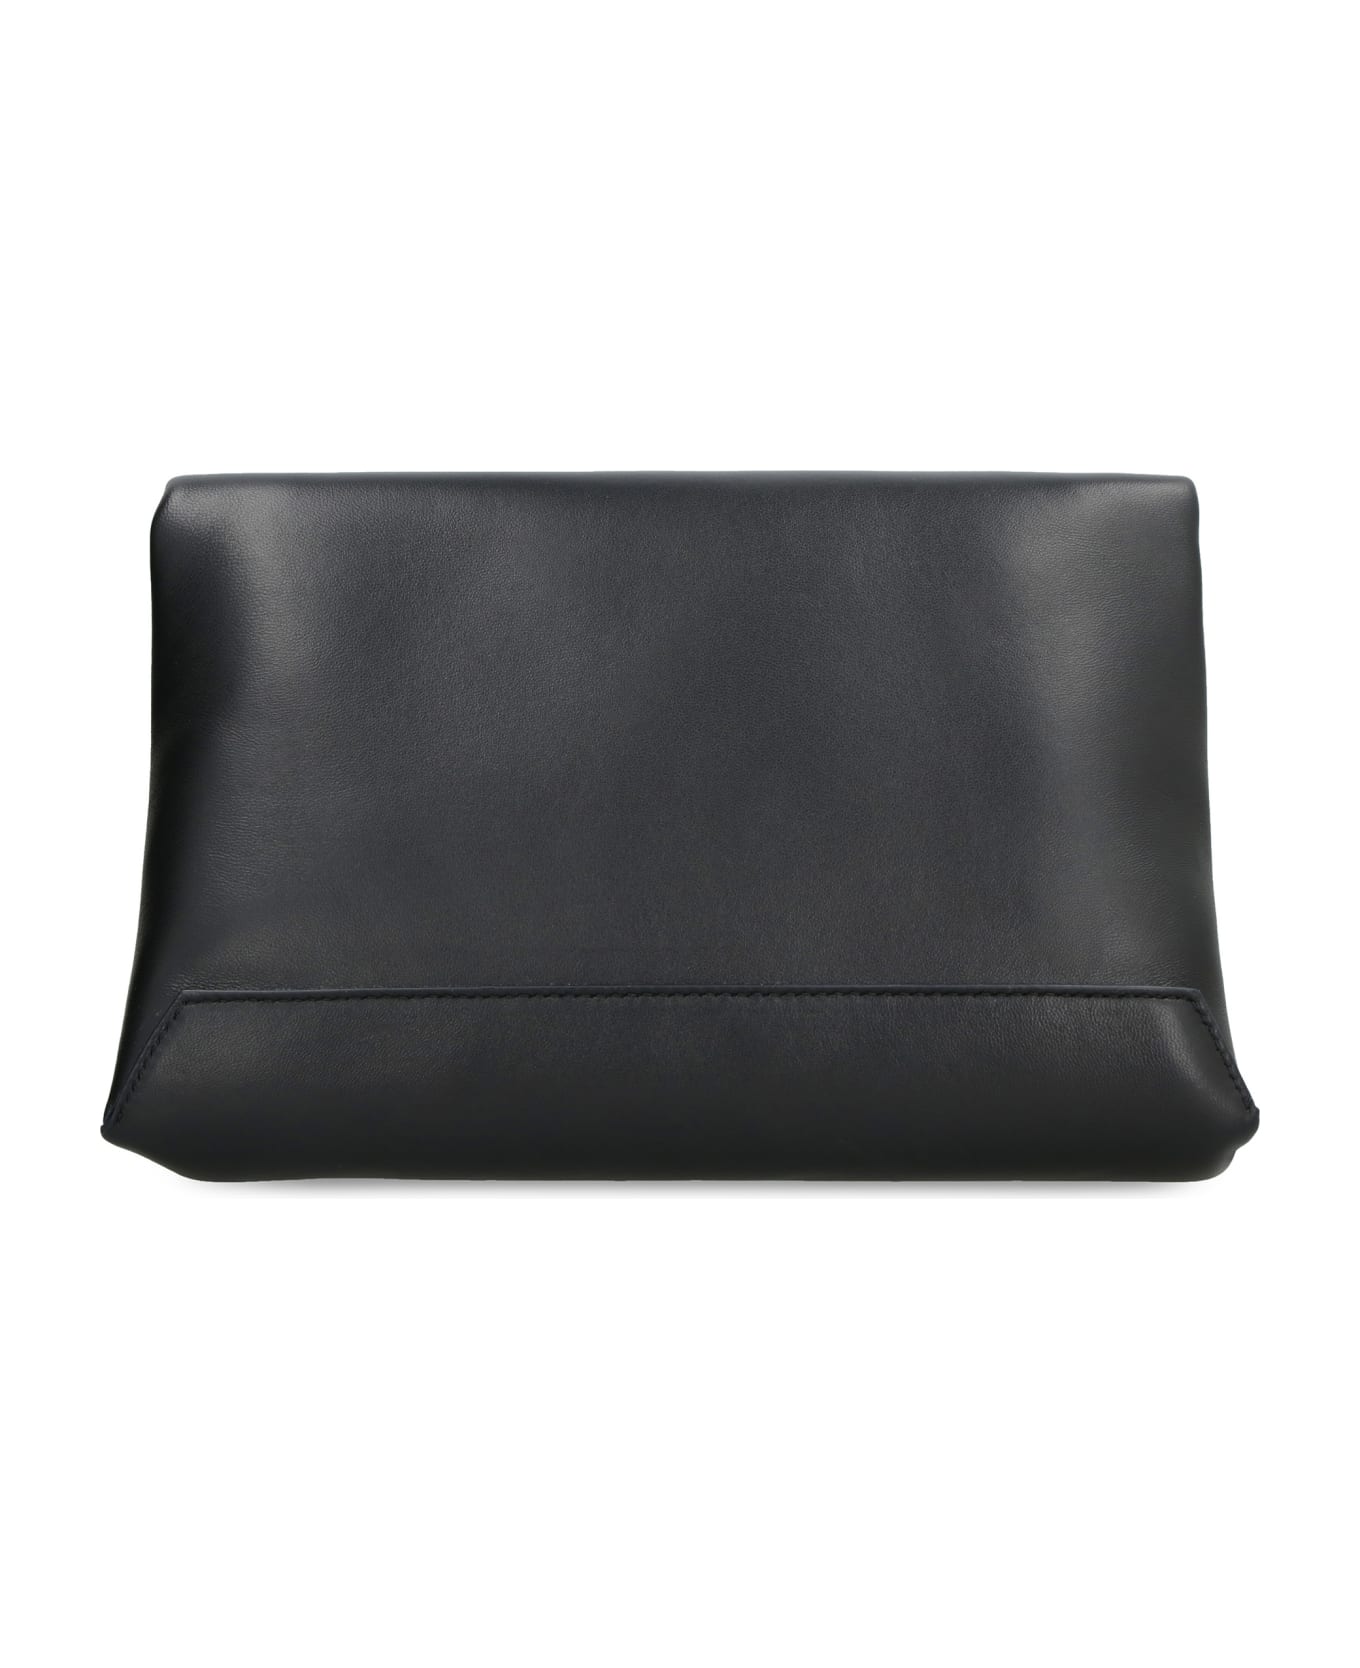 Victoria Beckham Leather Pouch - Bianco クラッチバッグ